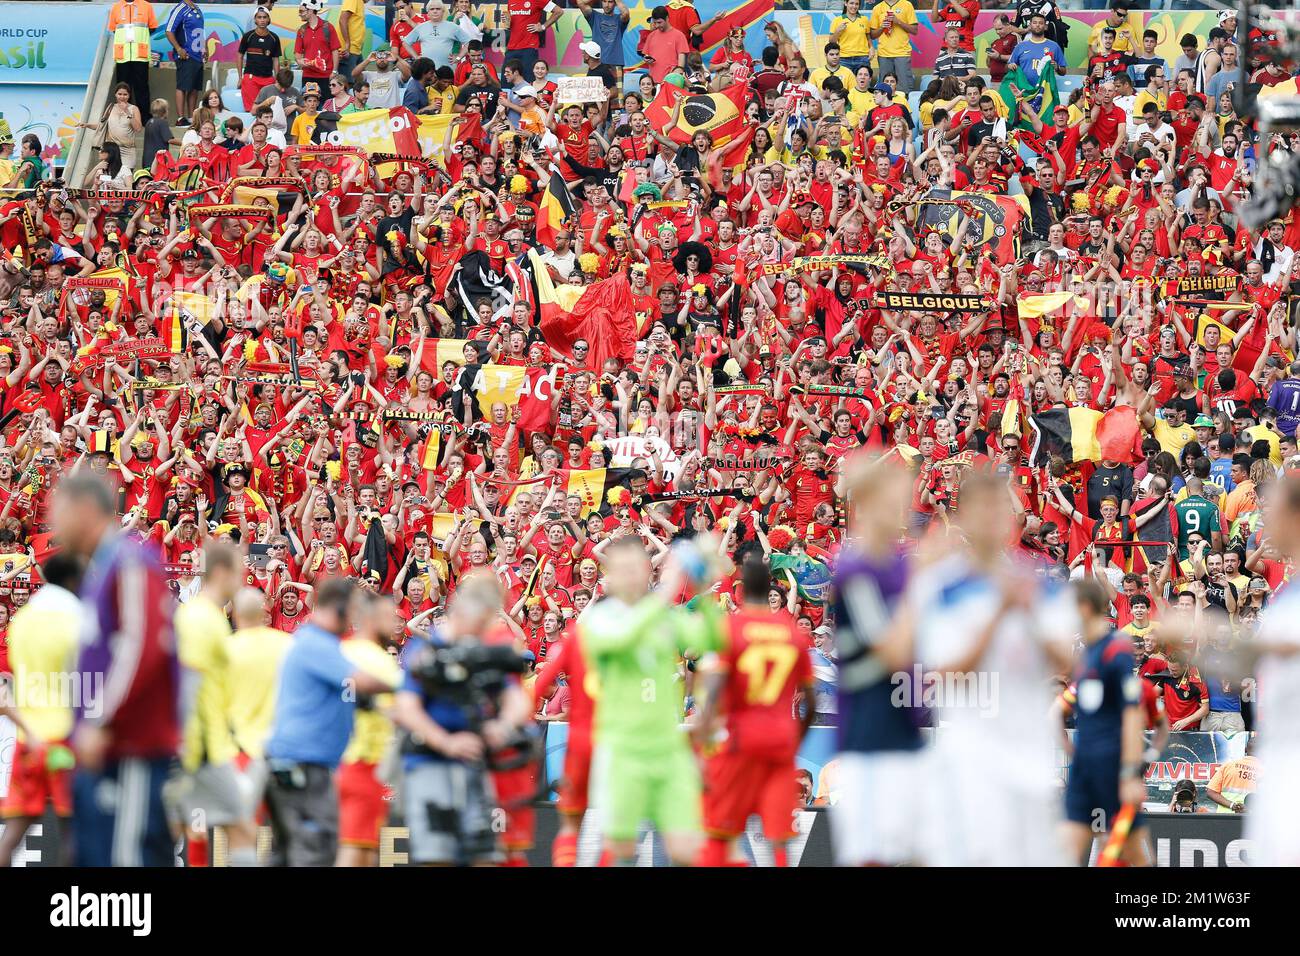 20140622 - RIO DE JANEIRO, BRAZIL: Belgium's players celebrate with supporters after winning 1-0 a soccer game between Belgian national team The Red Devils and Russia in Rio de Janeiro, Brazil, the second game in Group H of the first round of the 2014 FIFA World Cup, Sunday 22 June 2014. BELGA PHOTO BRUNO FAHY Stock Photo